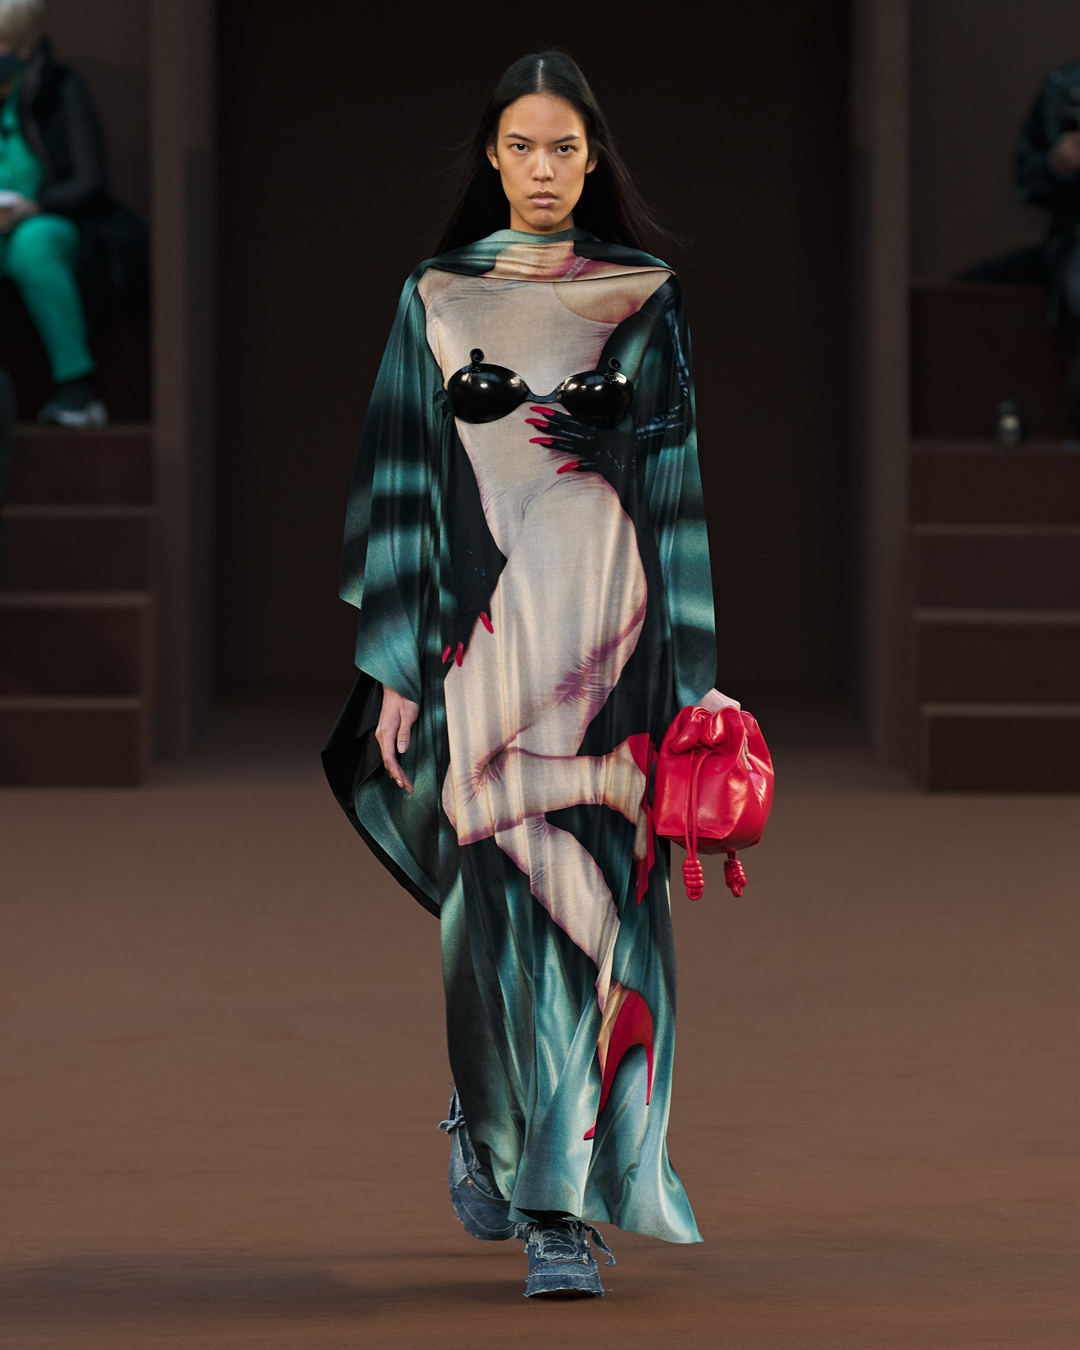  A trompe l’oeil dress with a balloon bra for Loewe FW 22.